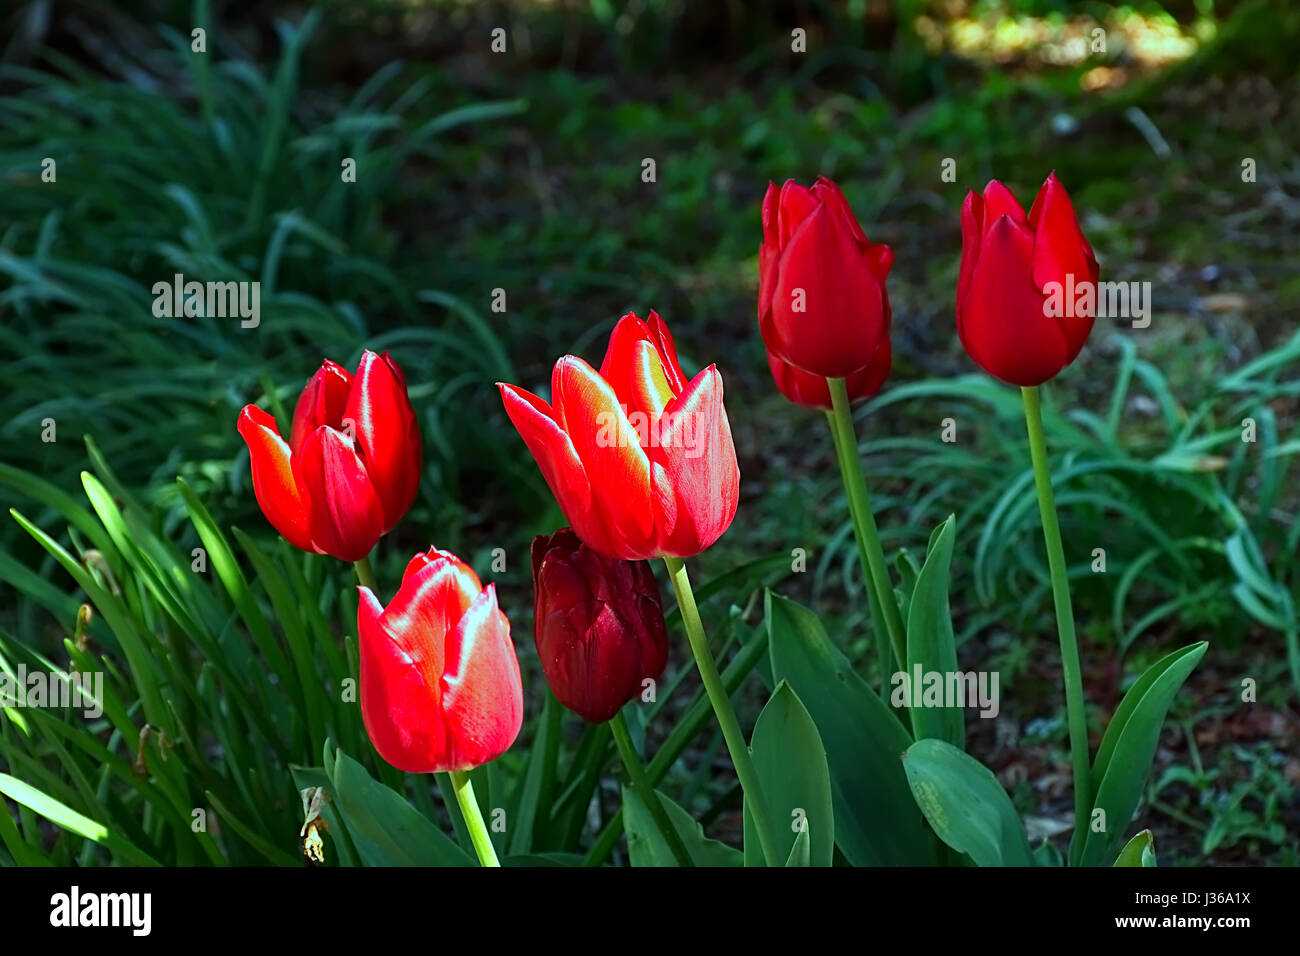 Red tulip flowers in shadow lightened by single afternoon sunray slipping in.Tulips uk.British spring flowers.Springtime bloom uk,nature uk. Stock Photo